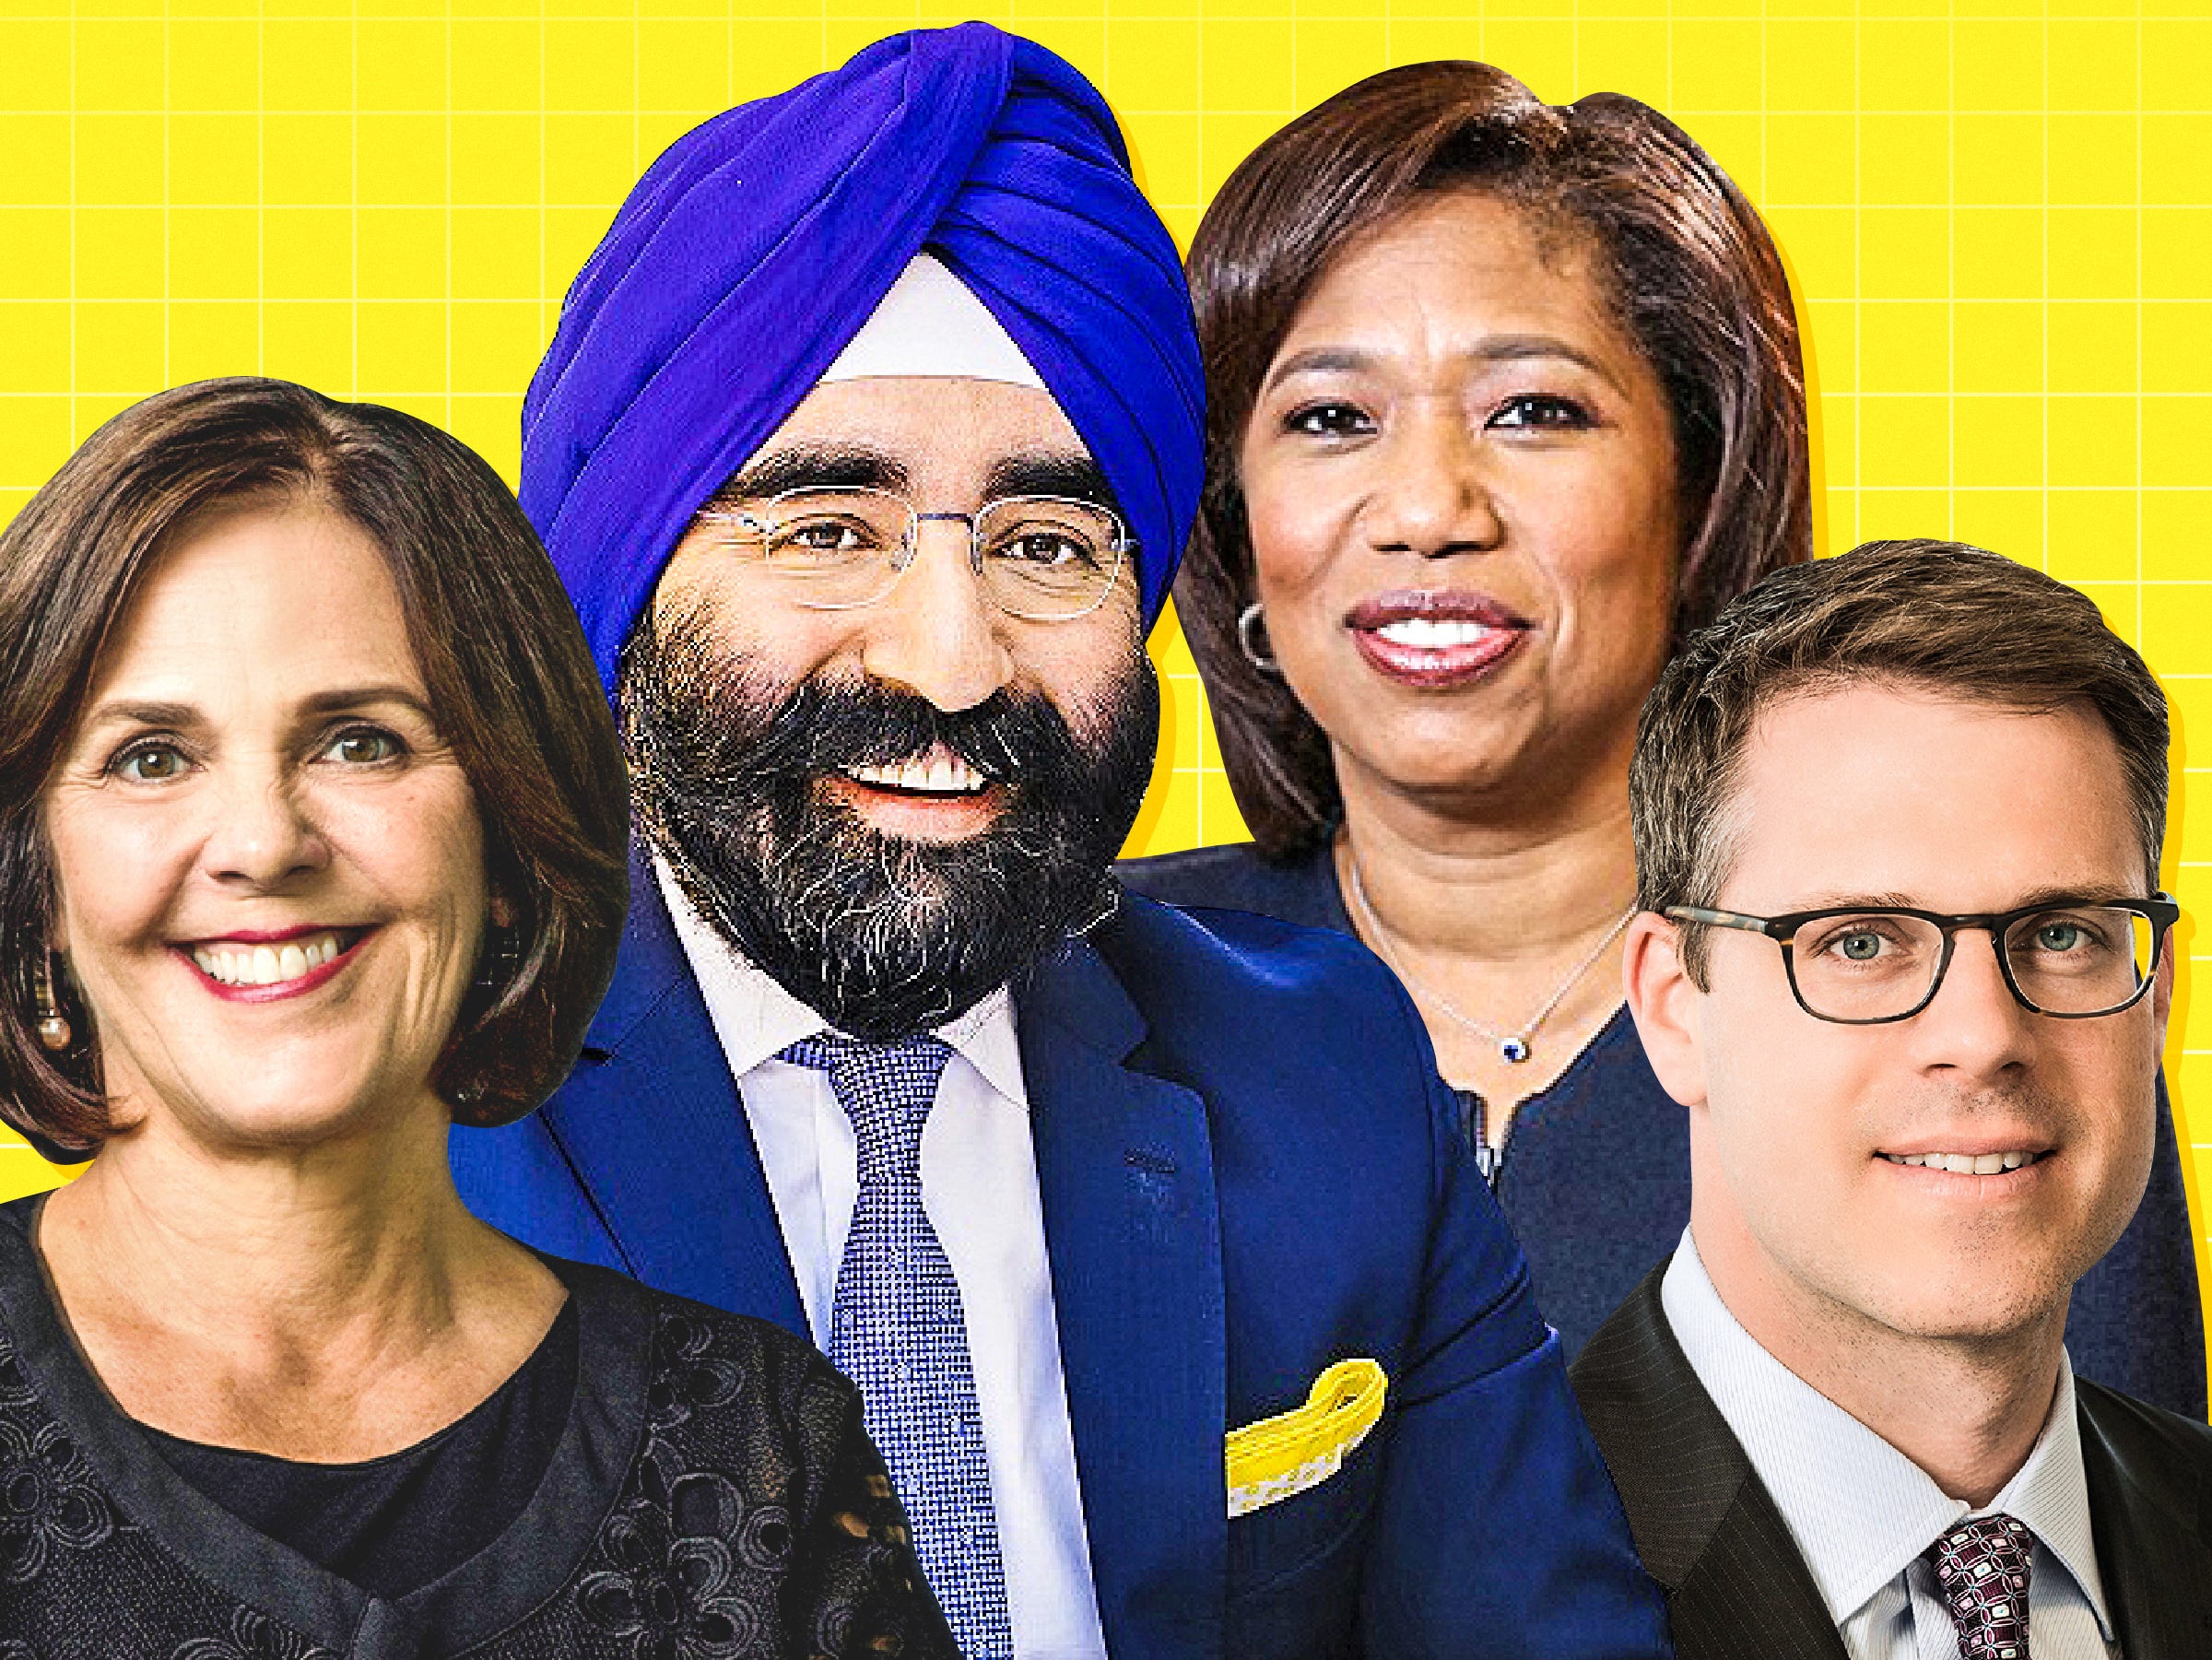 From left: Paula Volent, chief investment officer of The Rockefeller University, Jagdeep Singh Bachher, chief investment officer of University of California, Kim Lew, chief executive officer of the Columbia Investment Management Company, and Craig W. Smith, chief investment officer of Tufts University on a yellow background.